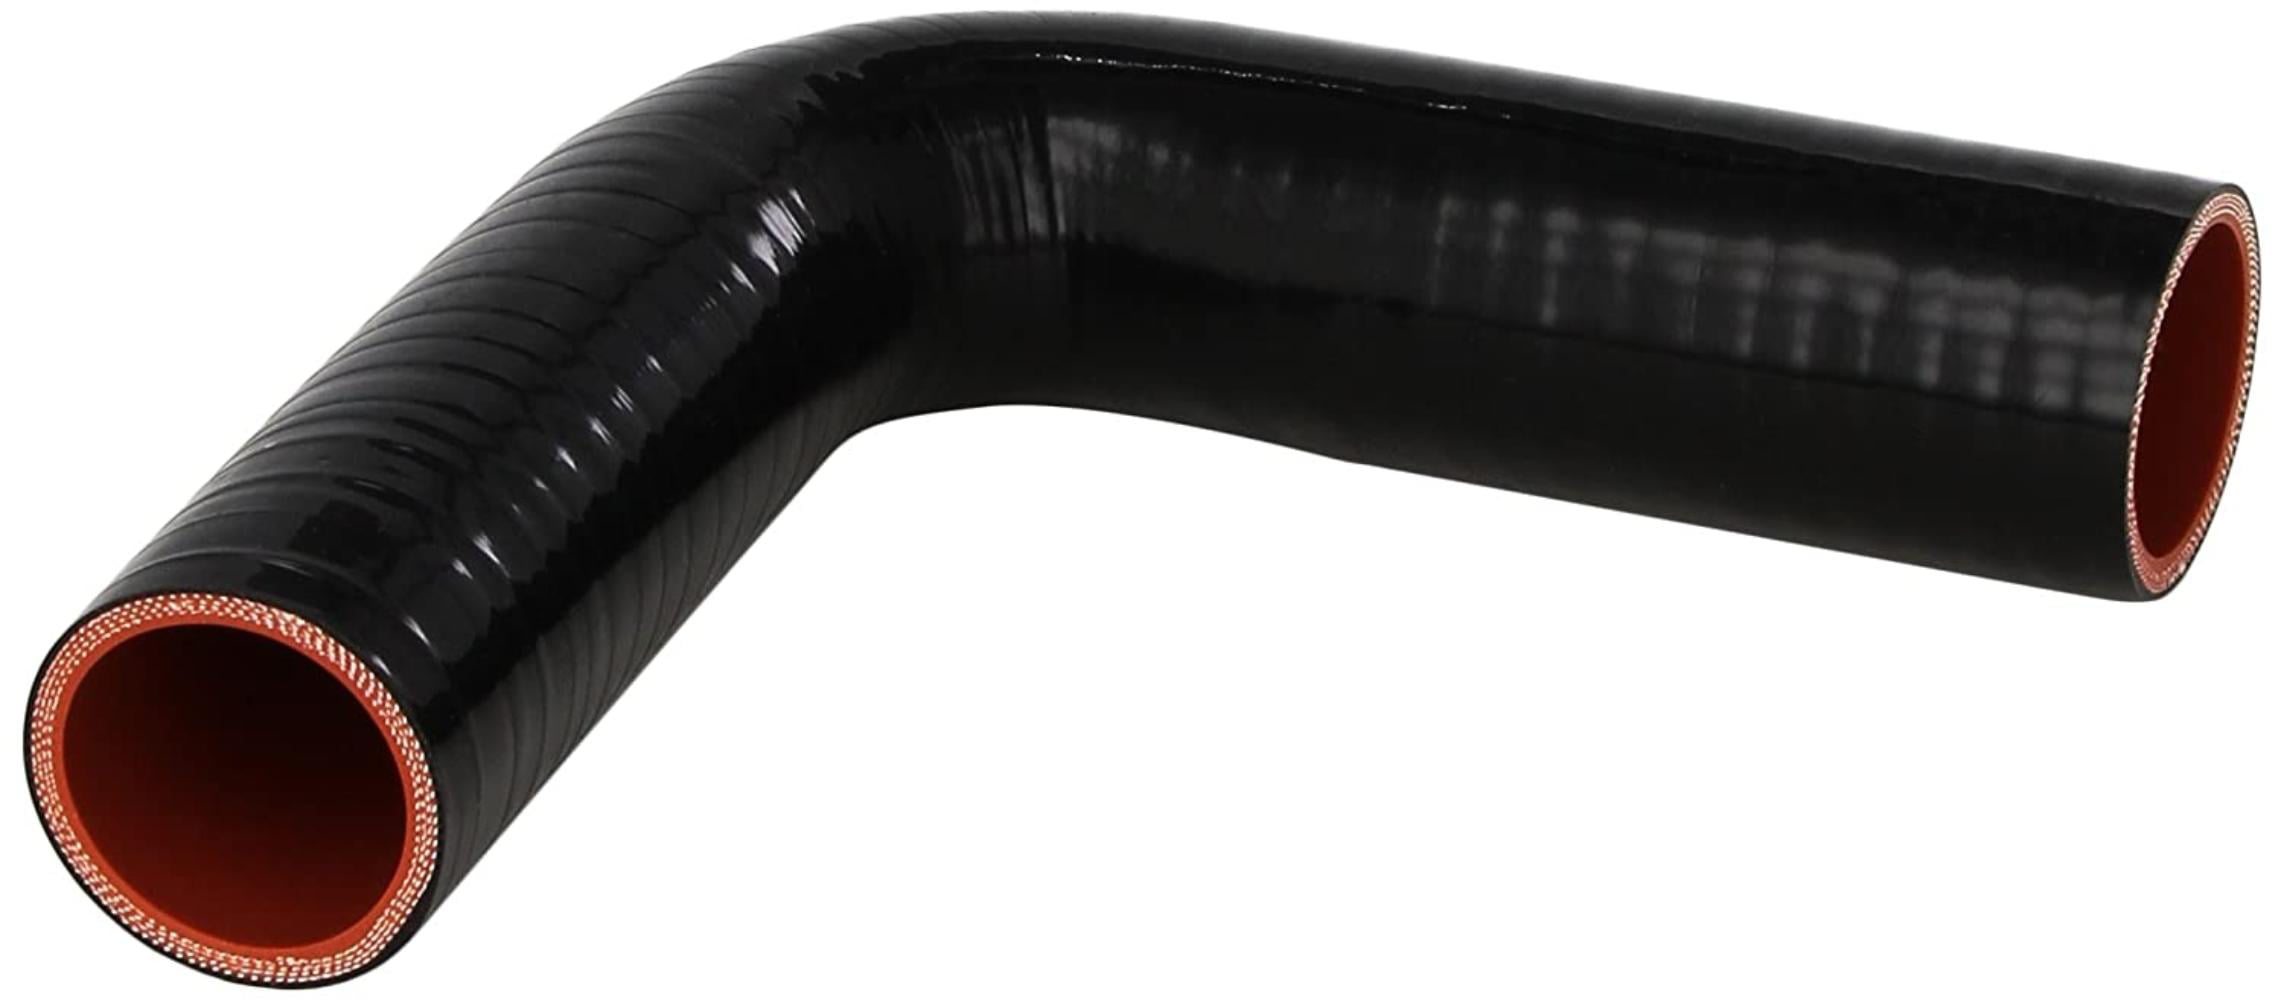 4 Leg Length on each side 100 PSI Maximum Pressure HPS HTSEC90-100-BLK Silicone High Temperature 4-ply Reinforced 90 degree Elbow Coupler Hose Black 1 ID 